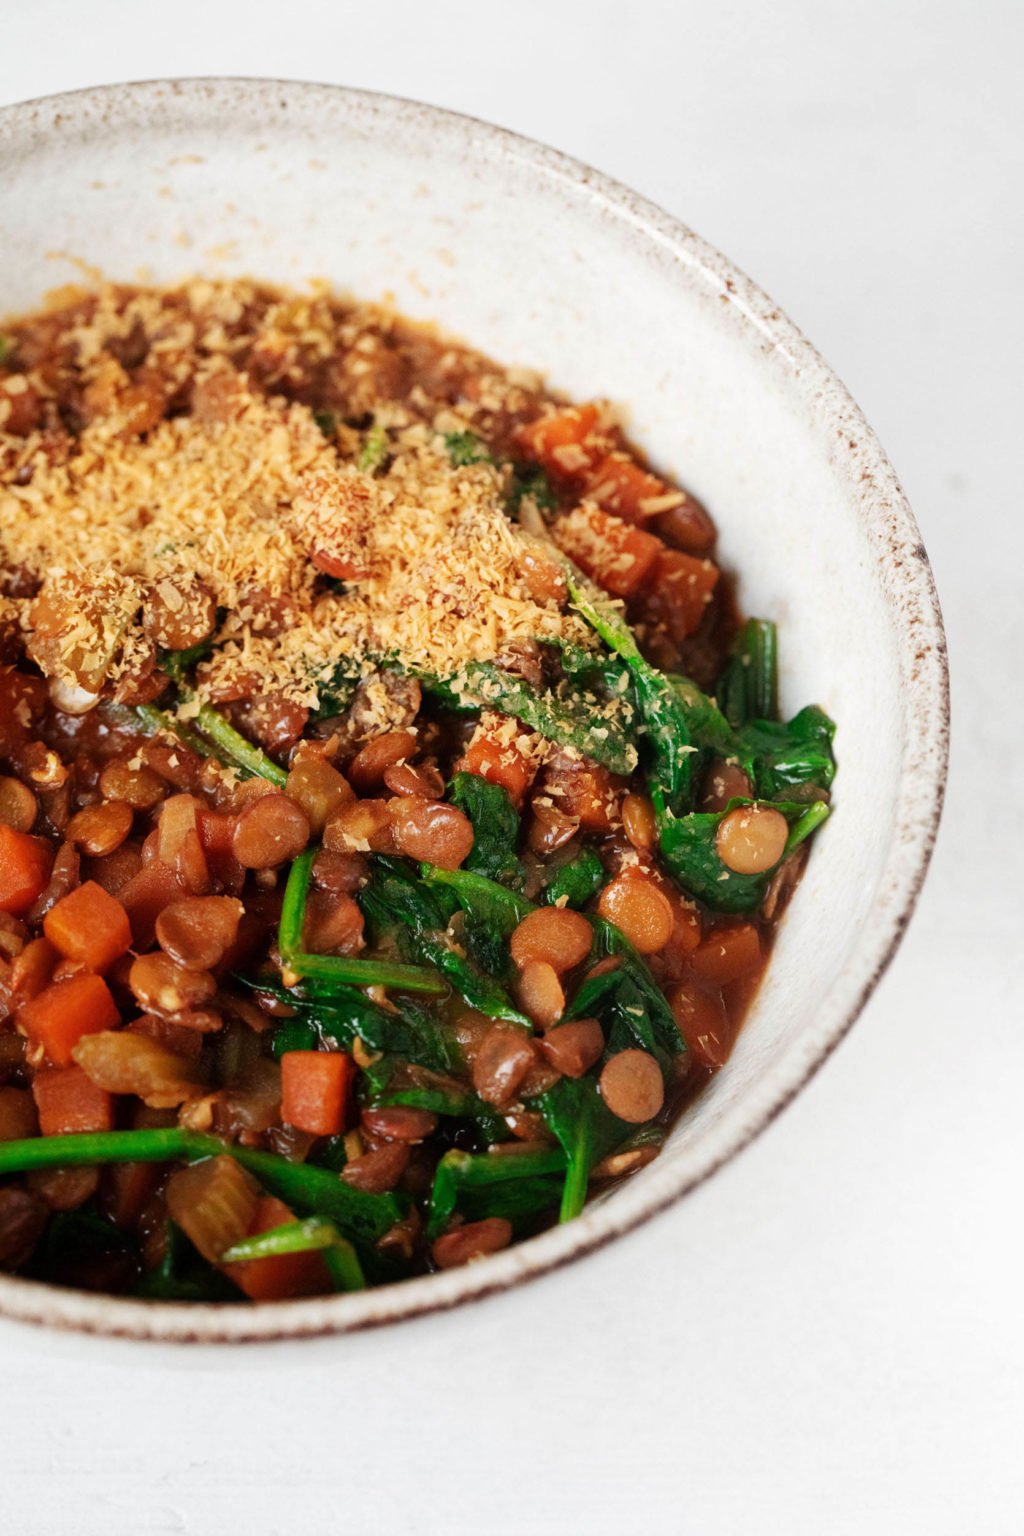 A hearty bowl of lentils, greens, vegetables and crushed cashews is served in a white bowl.